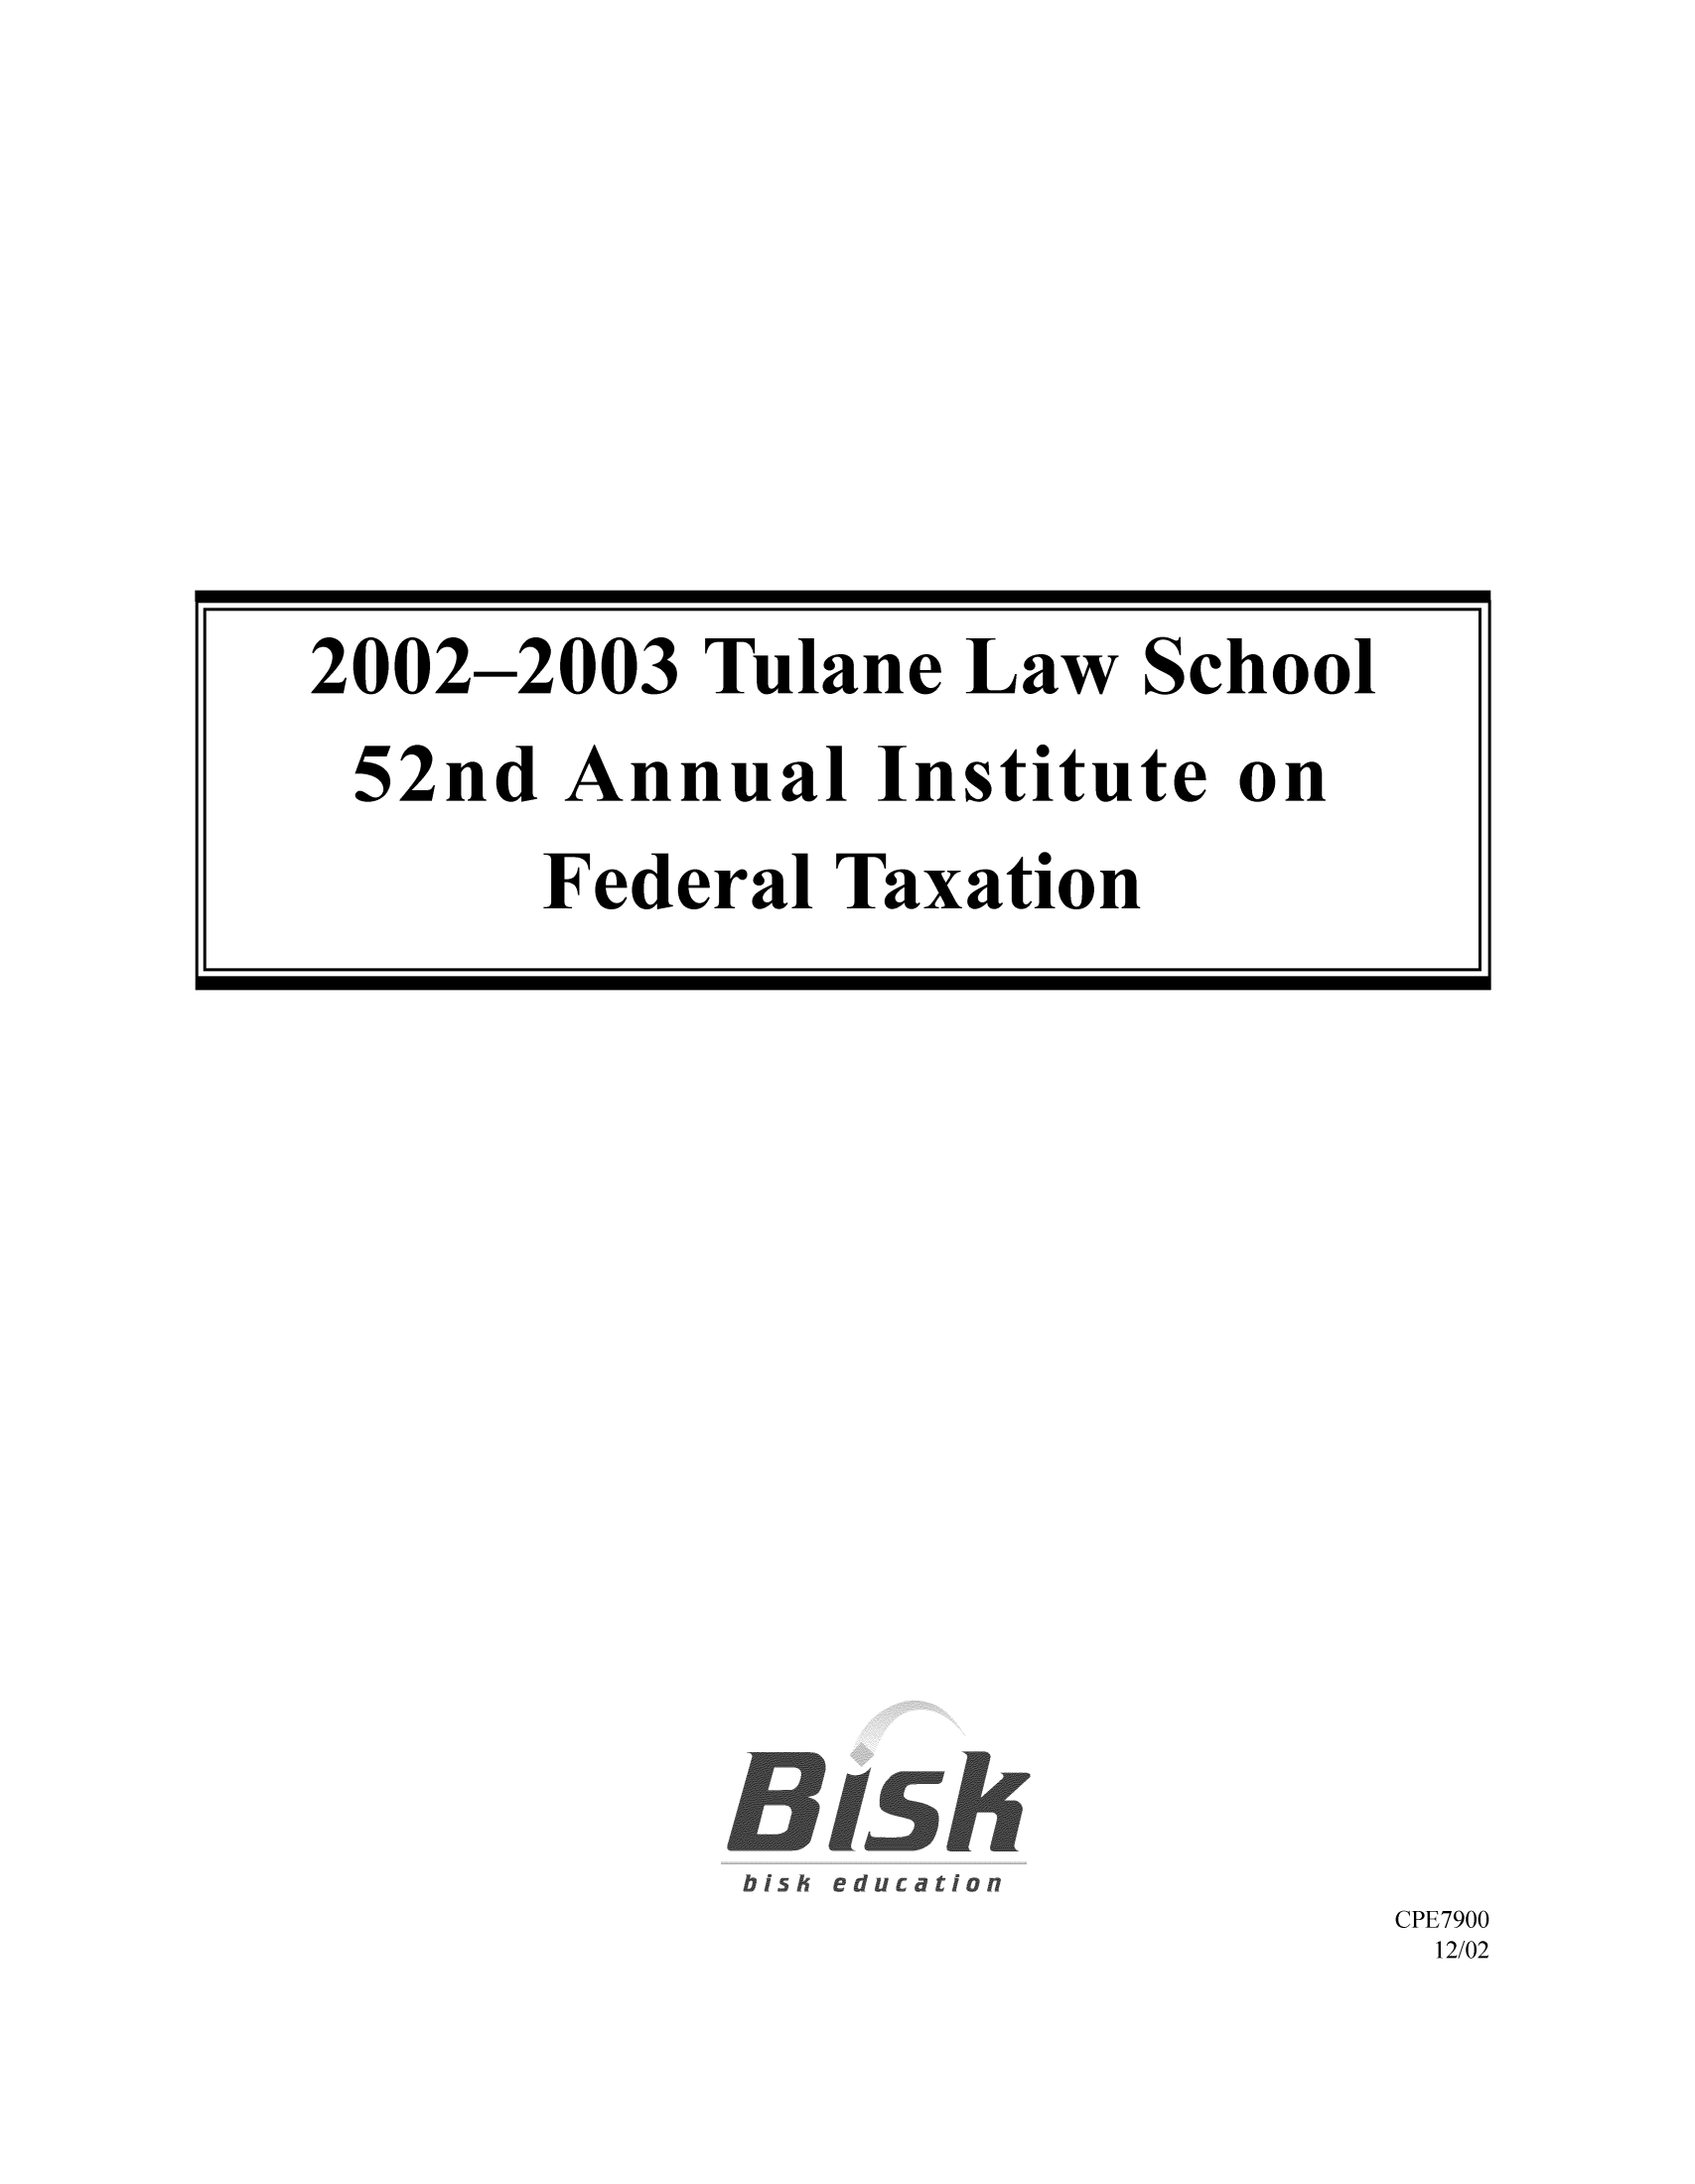 handle is hein.journals/tutain52 and id is 1 raw text is: CPE7900
12/02

2002-2003 Tulane Law School
52nd Annual Institute on
Federal Taxation


